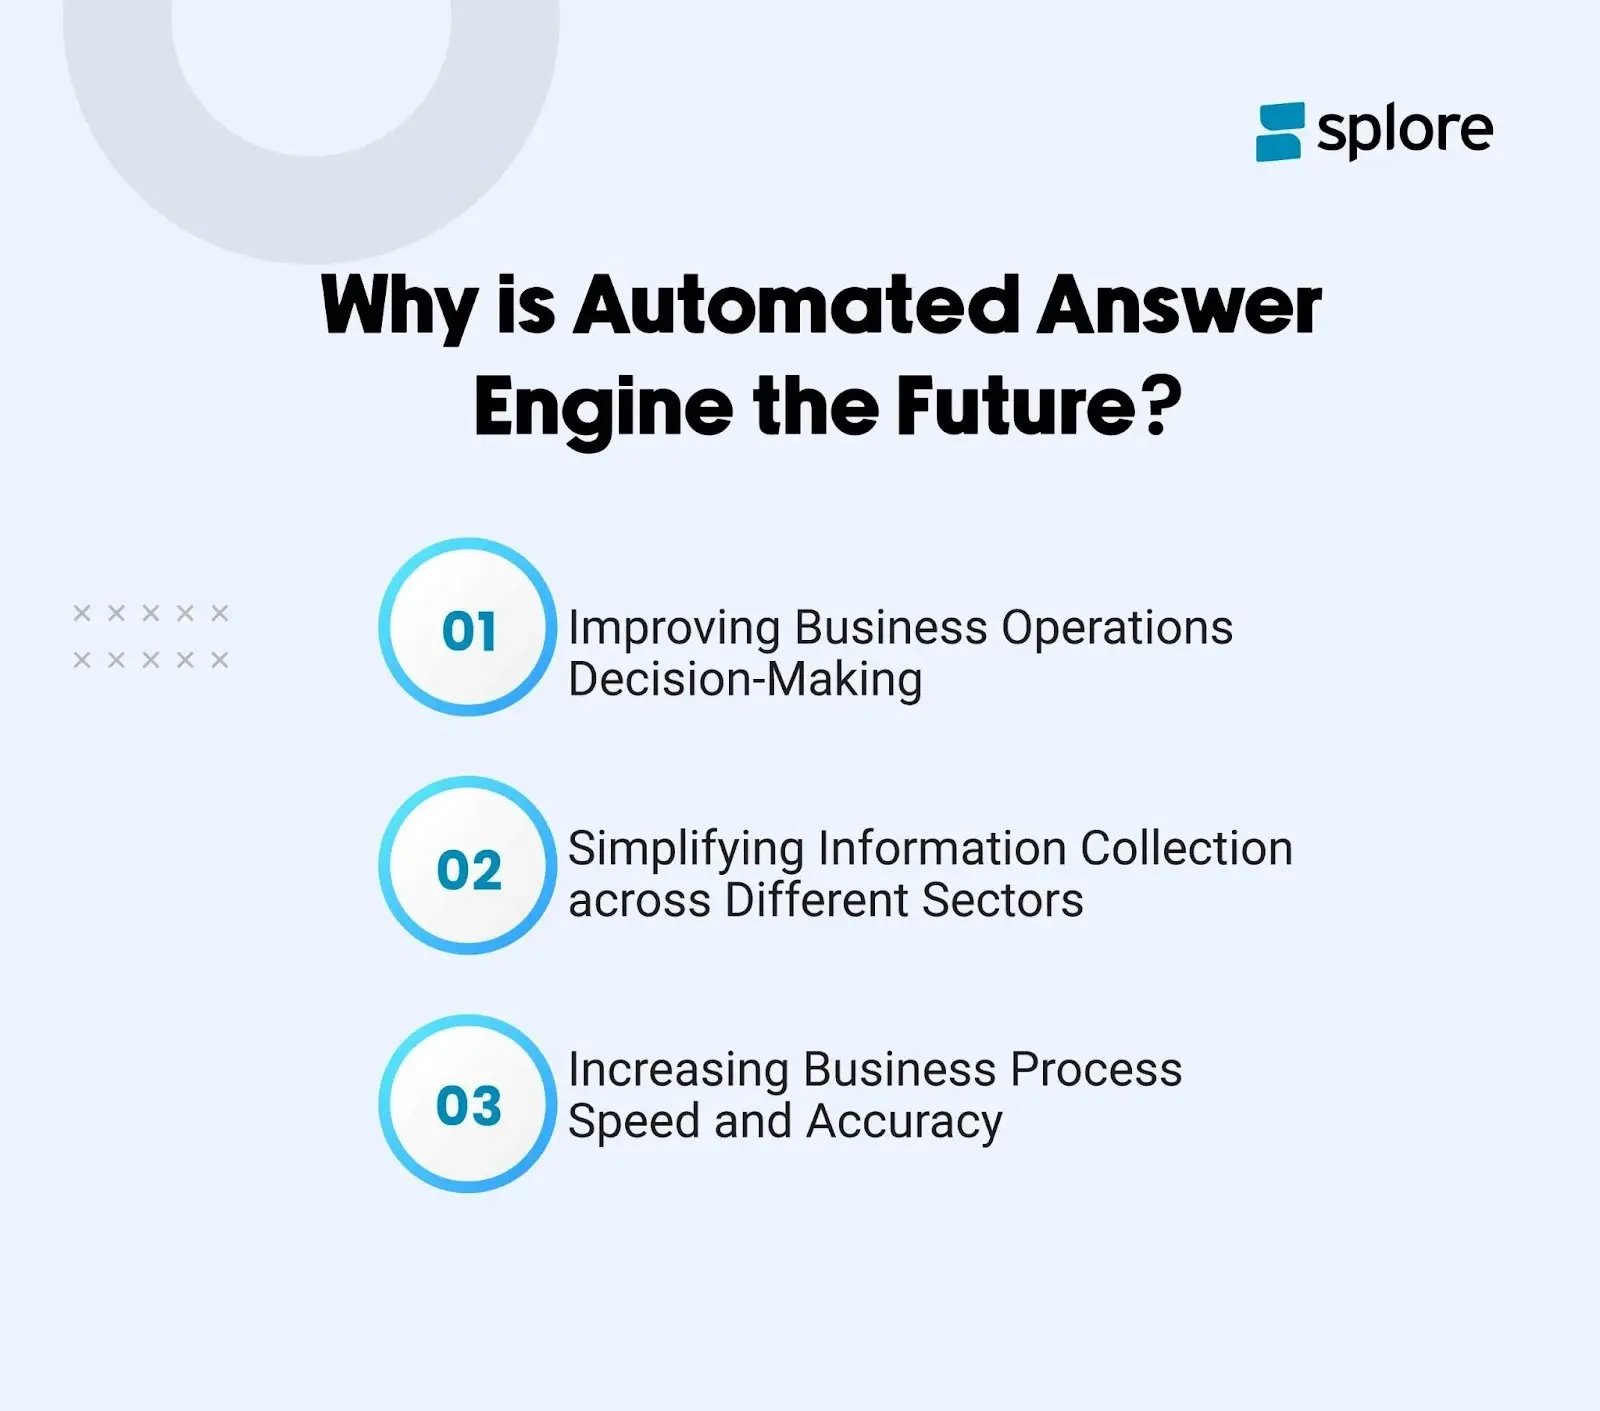 Why is Automated Answer Engine the Future?